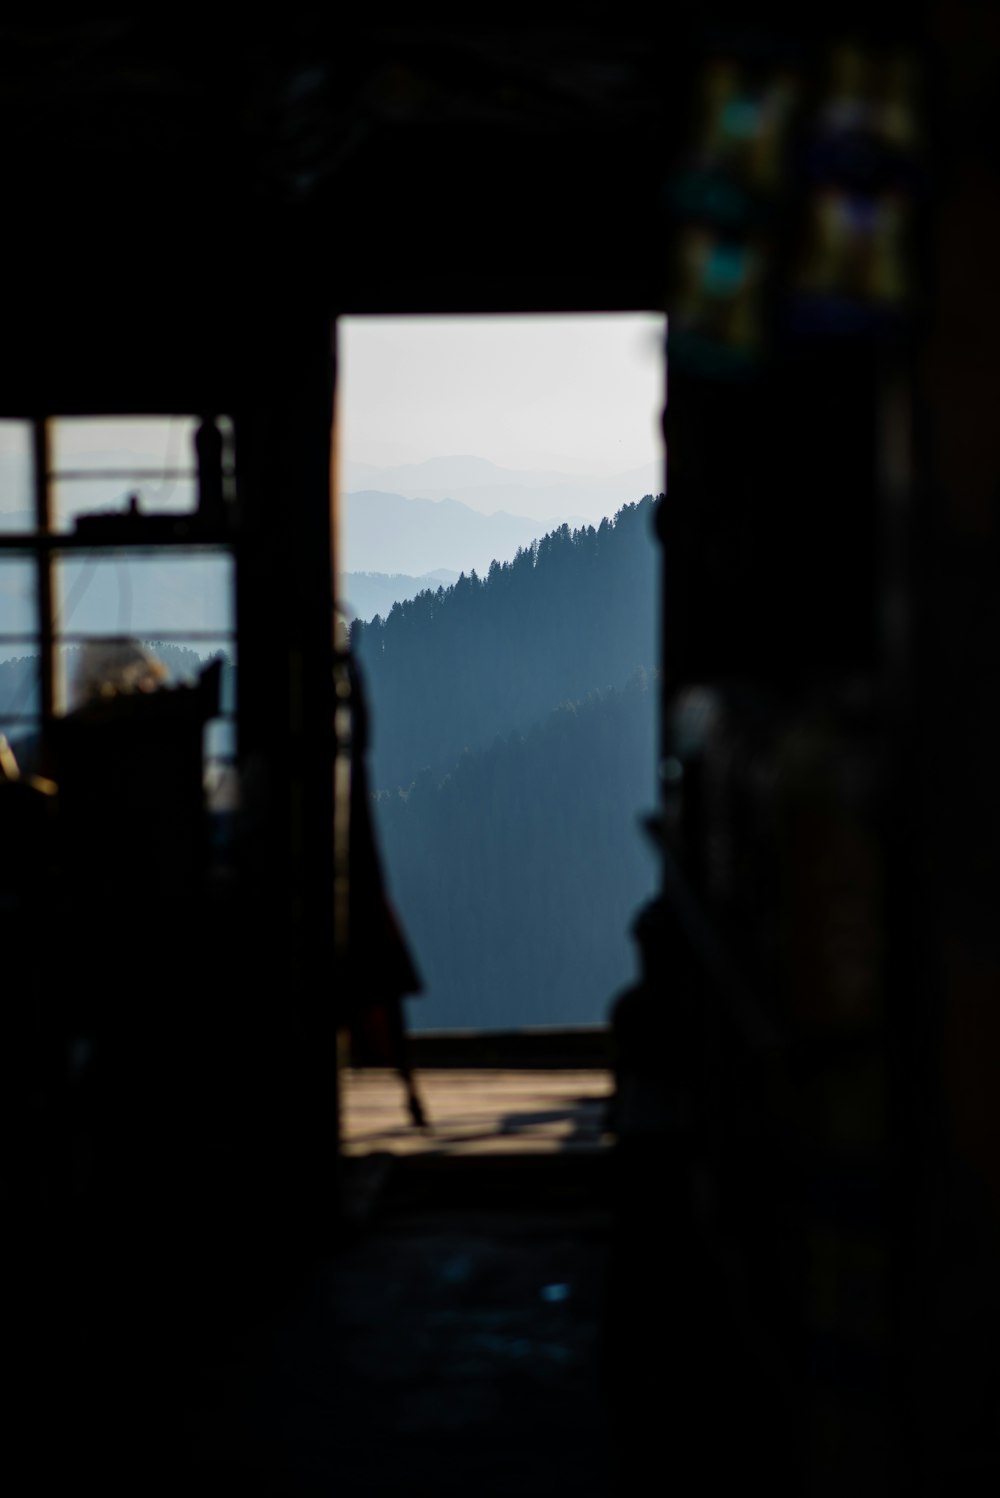 a view of the mountains from inside a building